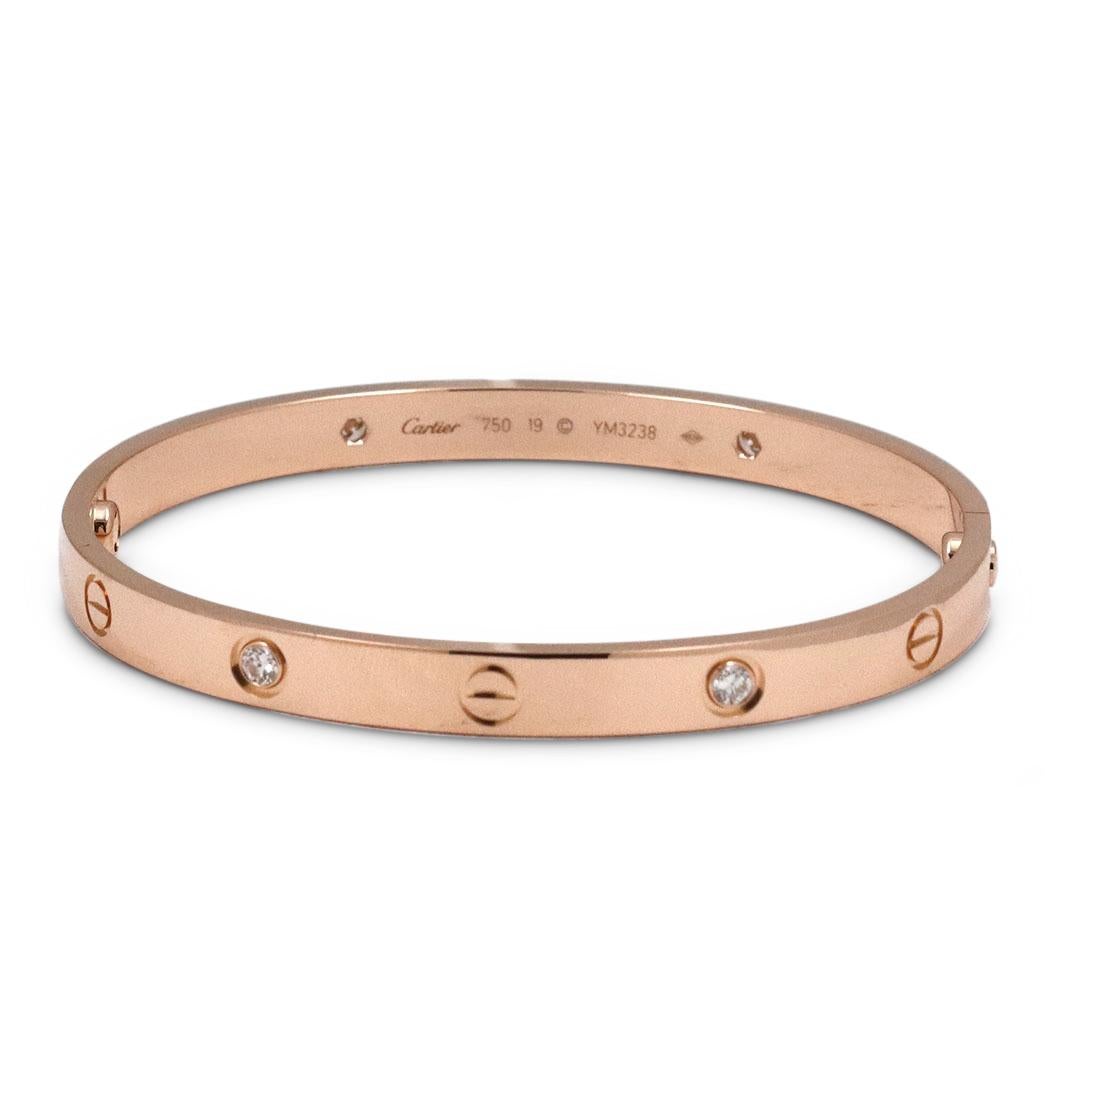 Authentic Cartier 'Love' bracelet crafted in 18 karat rose gold and set with four high-quality round brilliant cut diamonds (E-F color, VS clarity) weighing an estimated .42 carats total. Size 19 (US 6 1/2). Signed Cartier, 750, 19, with serial